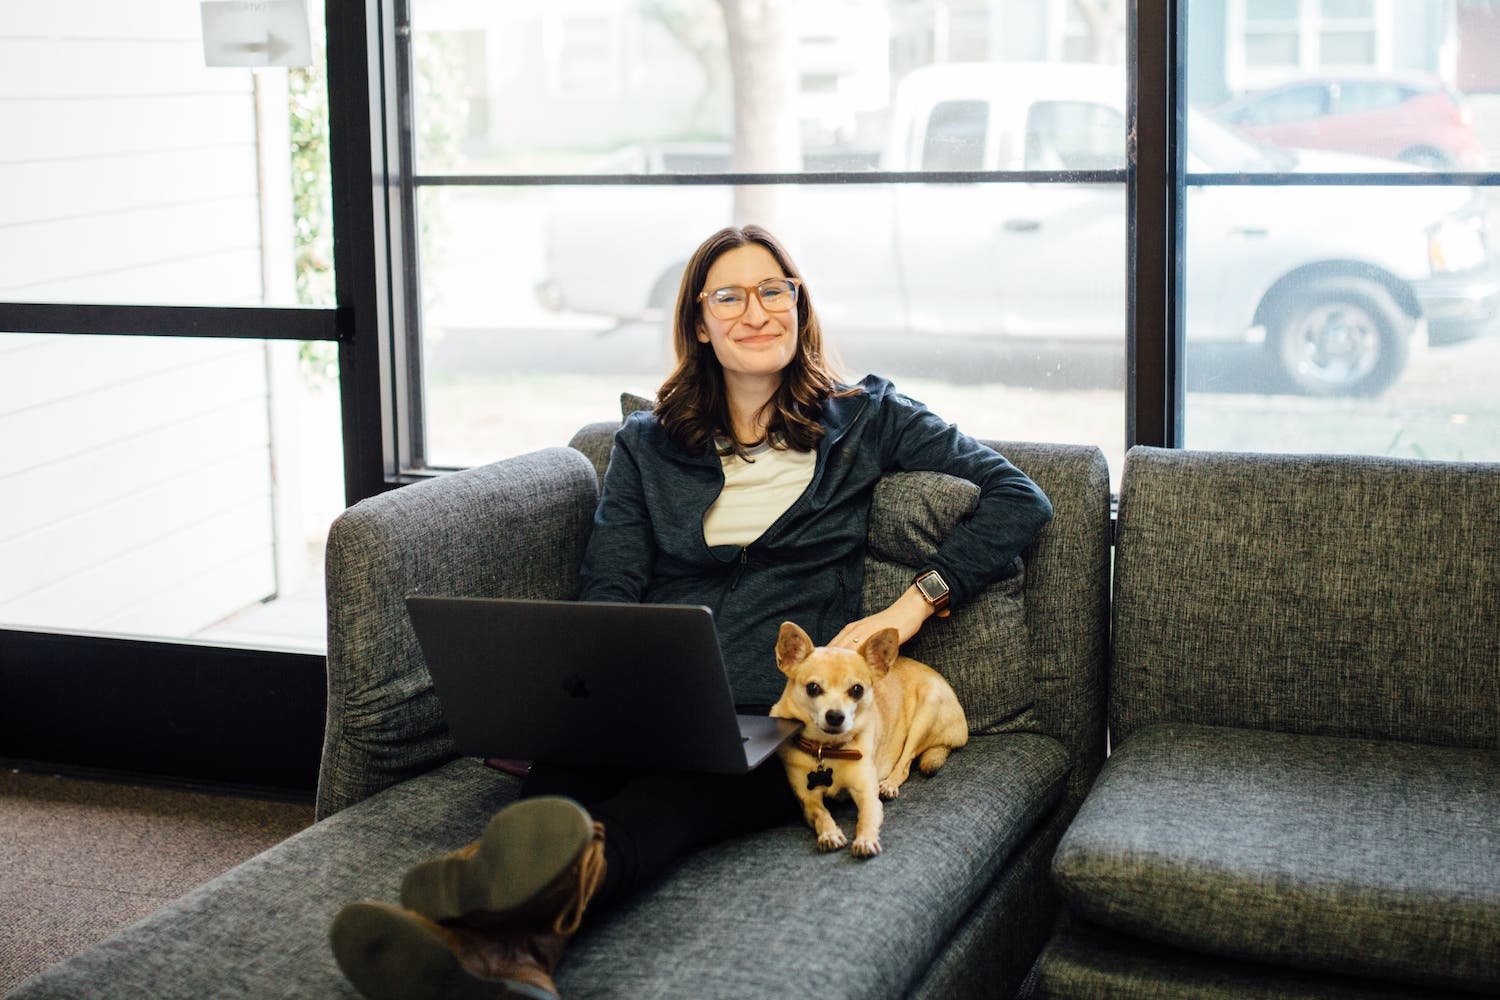 Employee working on at couch with a dog next to them